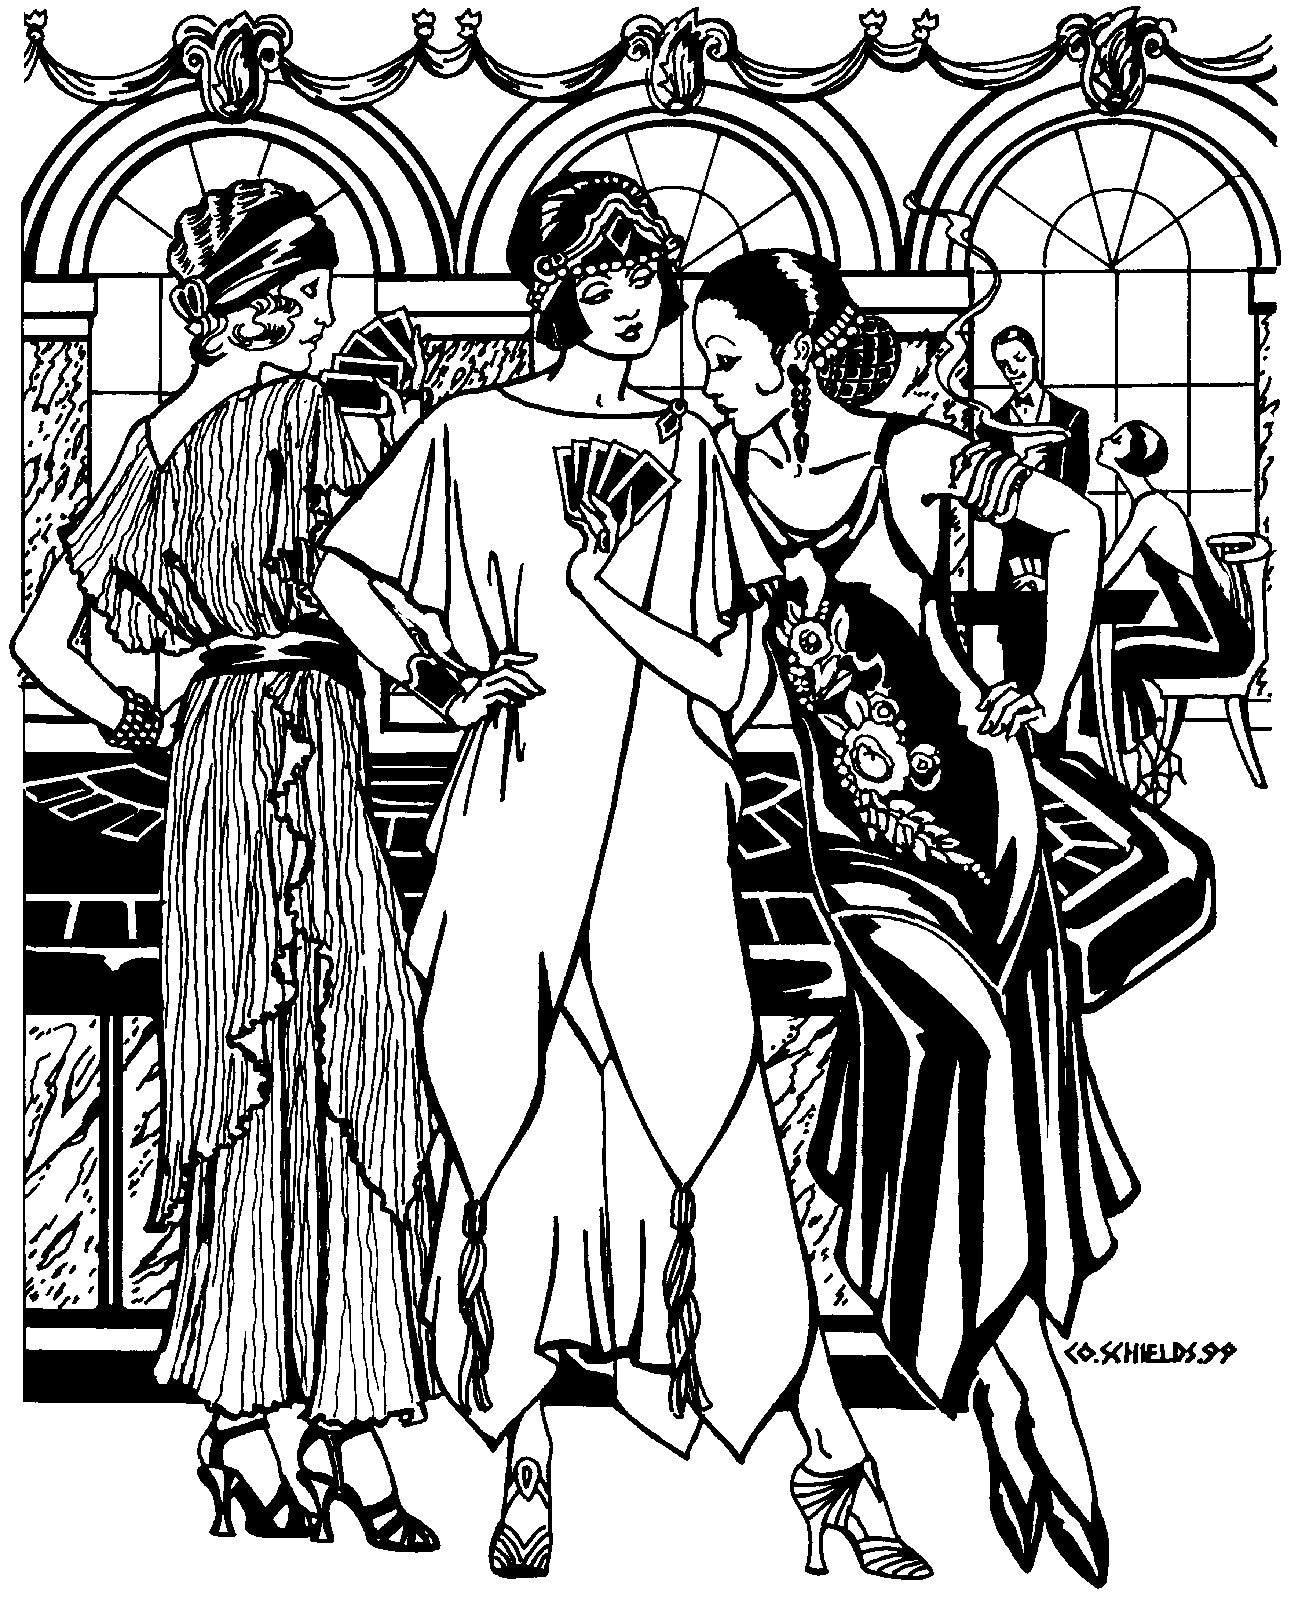 Black and white pen and ink drawing by artist Gretchen Shields. Three women, woman on the left back facing viewer holding cards wearing the Monte Carlo Dress V- Neck Tunic, woman in the center wearing the crossover tunic, woman on the right wearing the Monte Carlo Dress showing the center woman her cards .